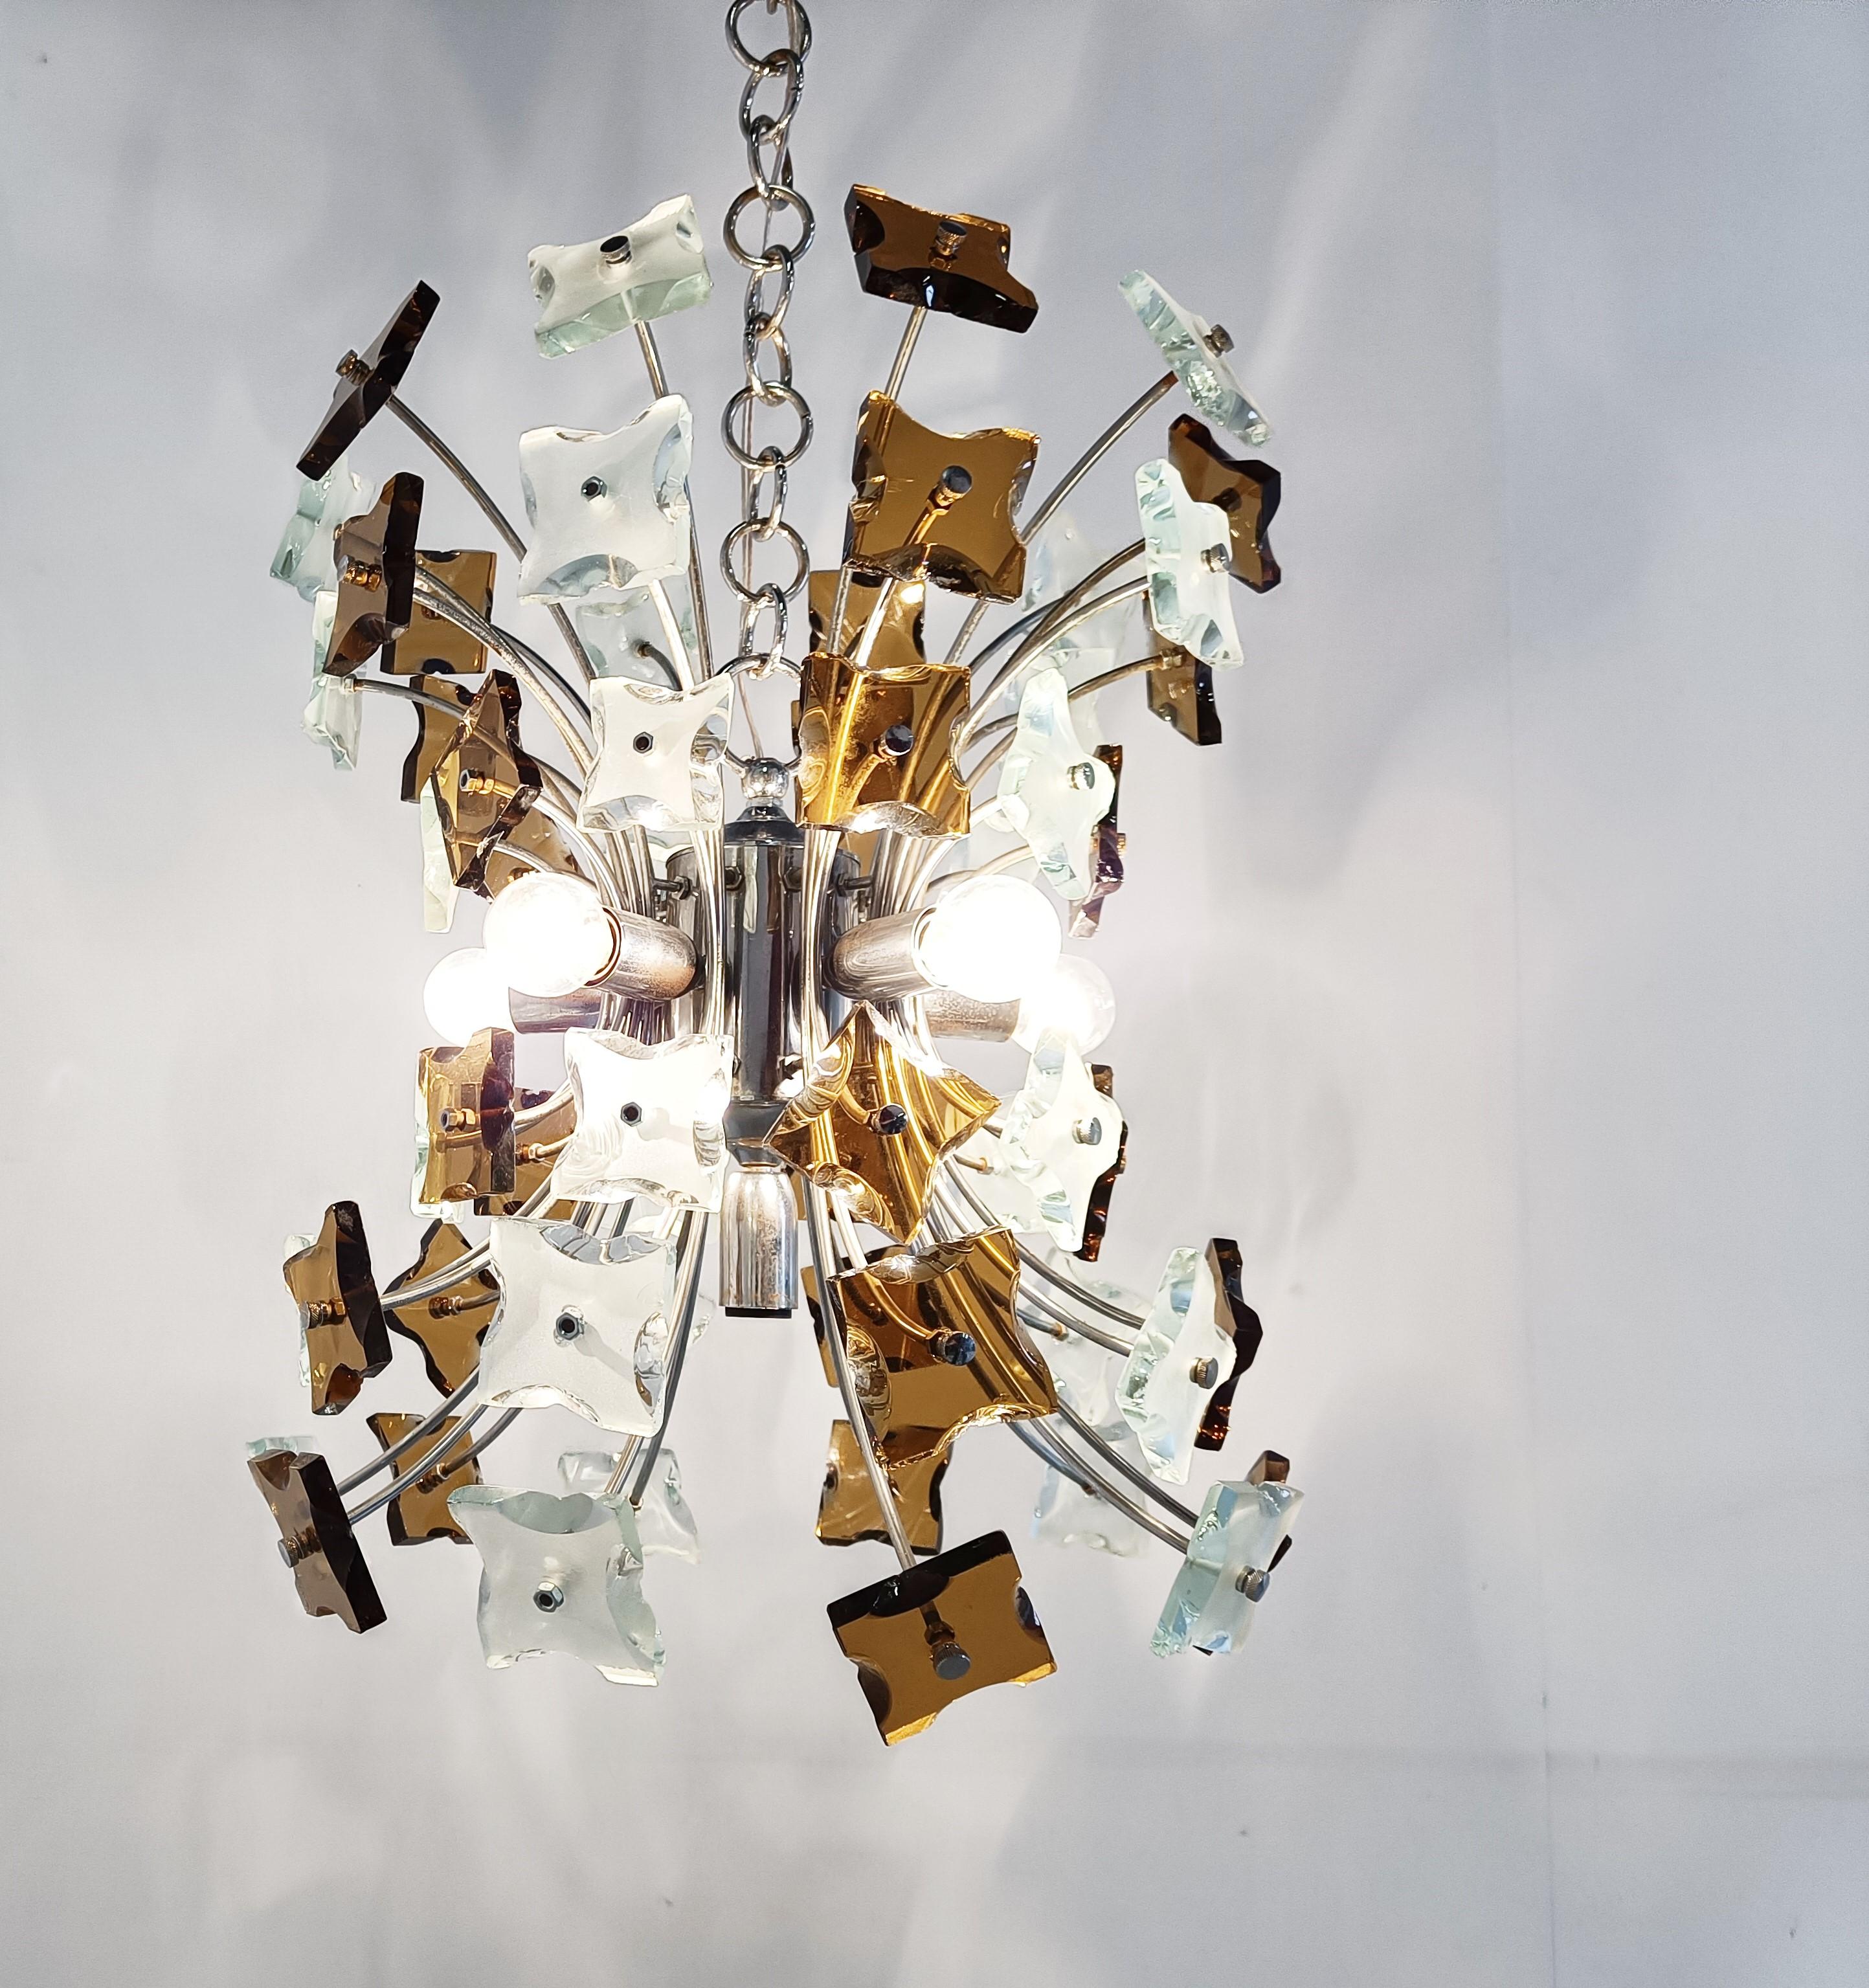 Striking chandelier with blue and brown hammered glass glasses mounted on a chrome frame.

Once illuminated, this beautiful chandelier emits a warm diffuse light.

Tested and ready to use.

We can change the chain length if desired.

Works